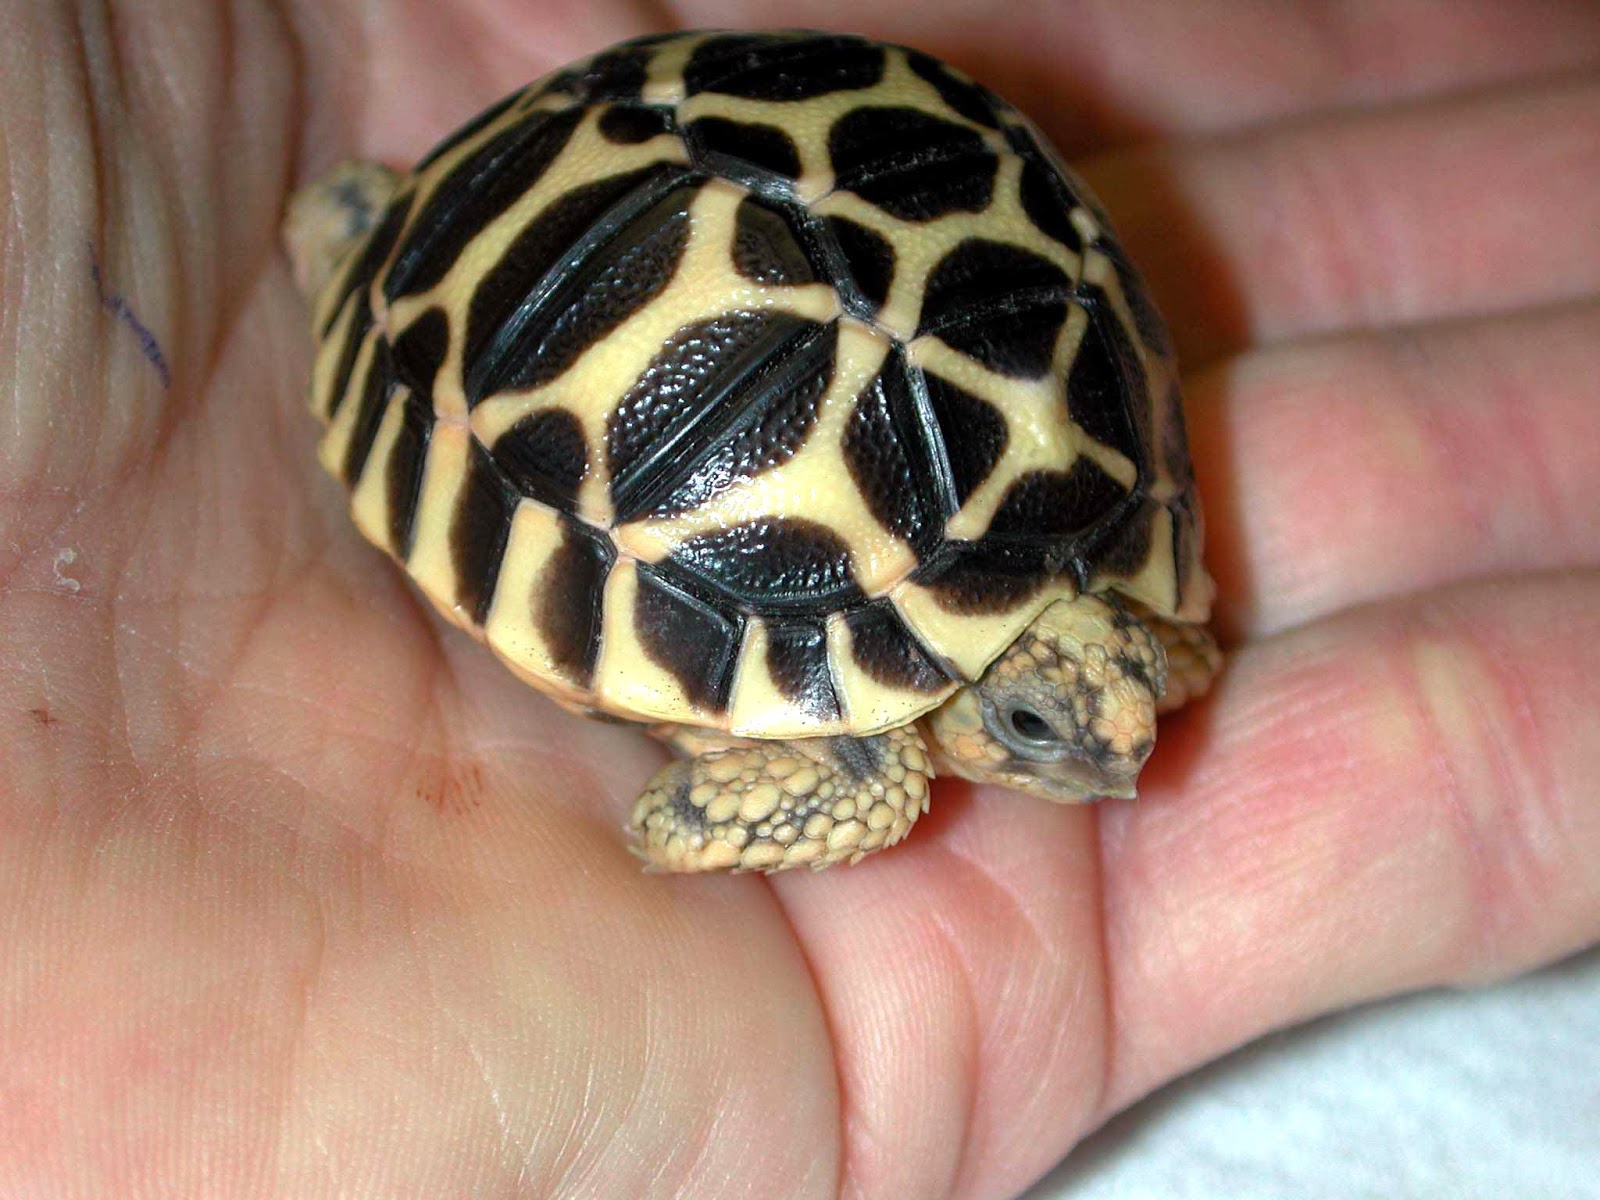 Rules of the Jungle: The Indian Star Tortoise